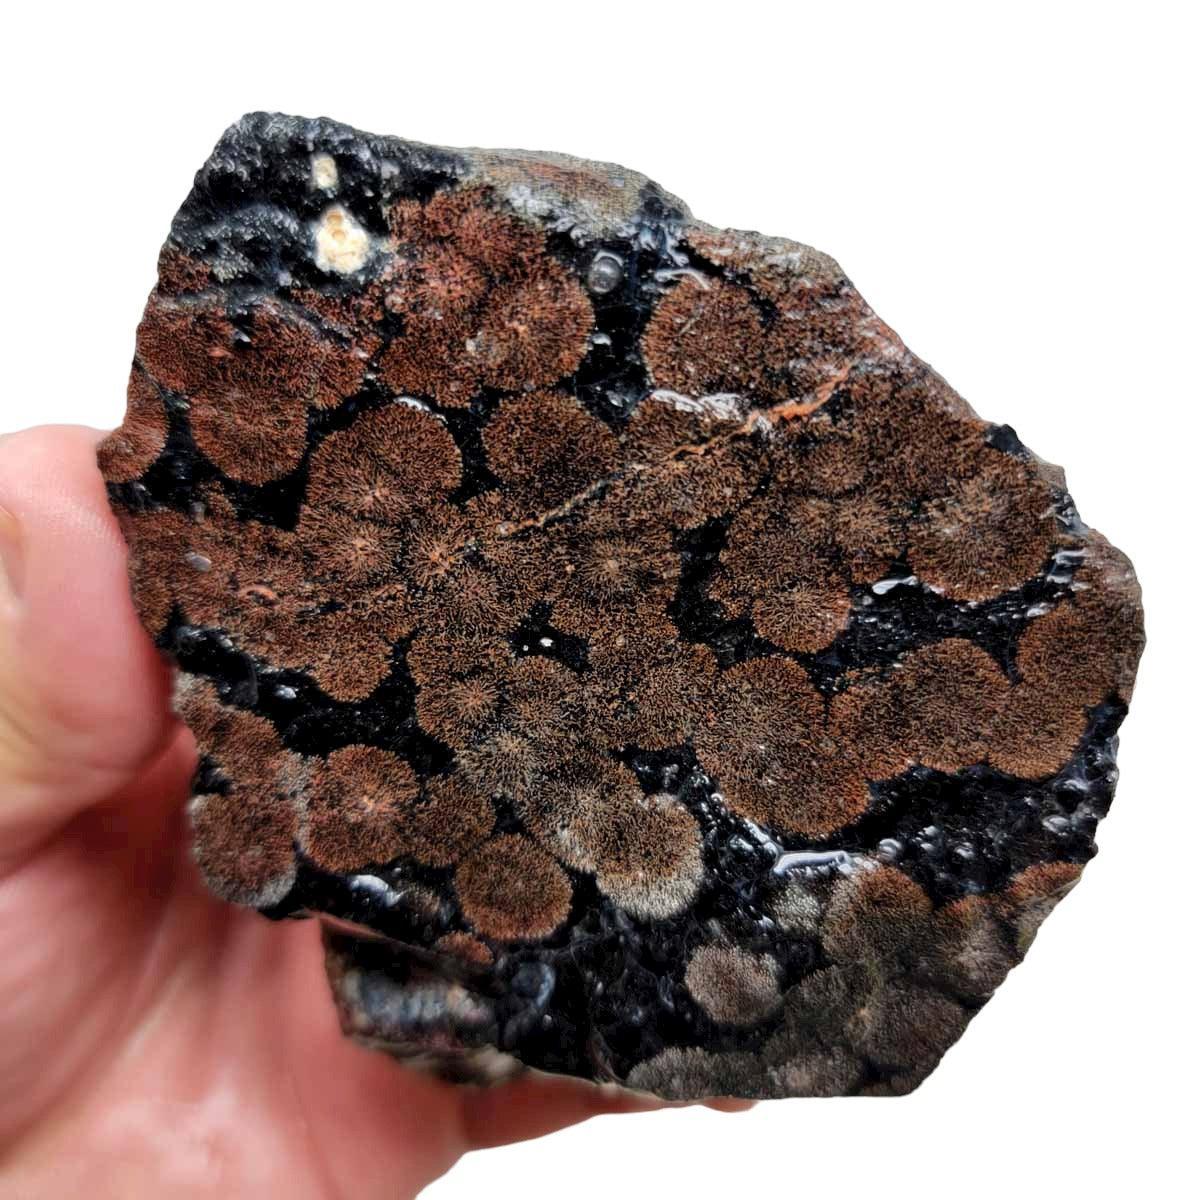 Flower/Fireworks Obsidian Rough Chunk! - LapidaryCentral